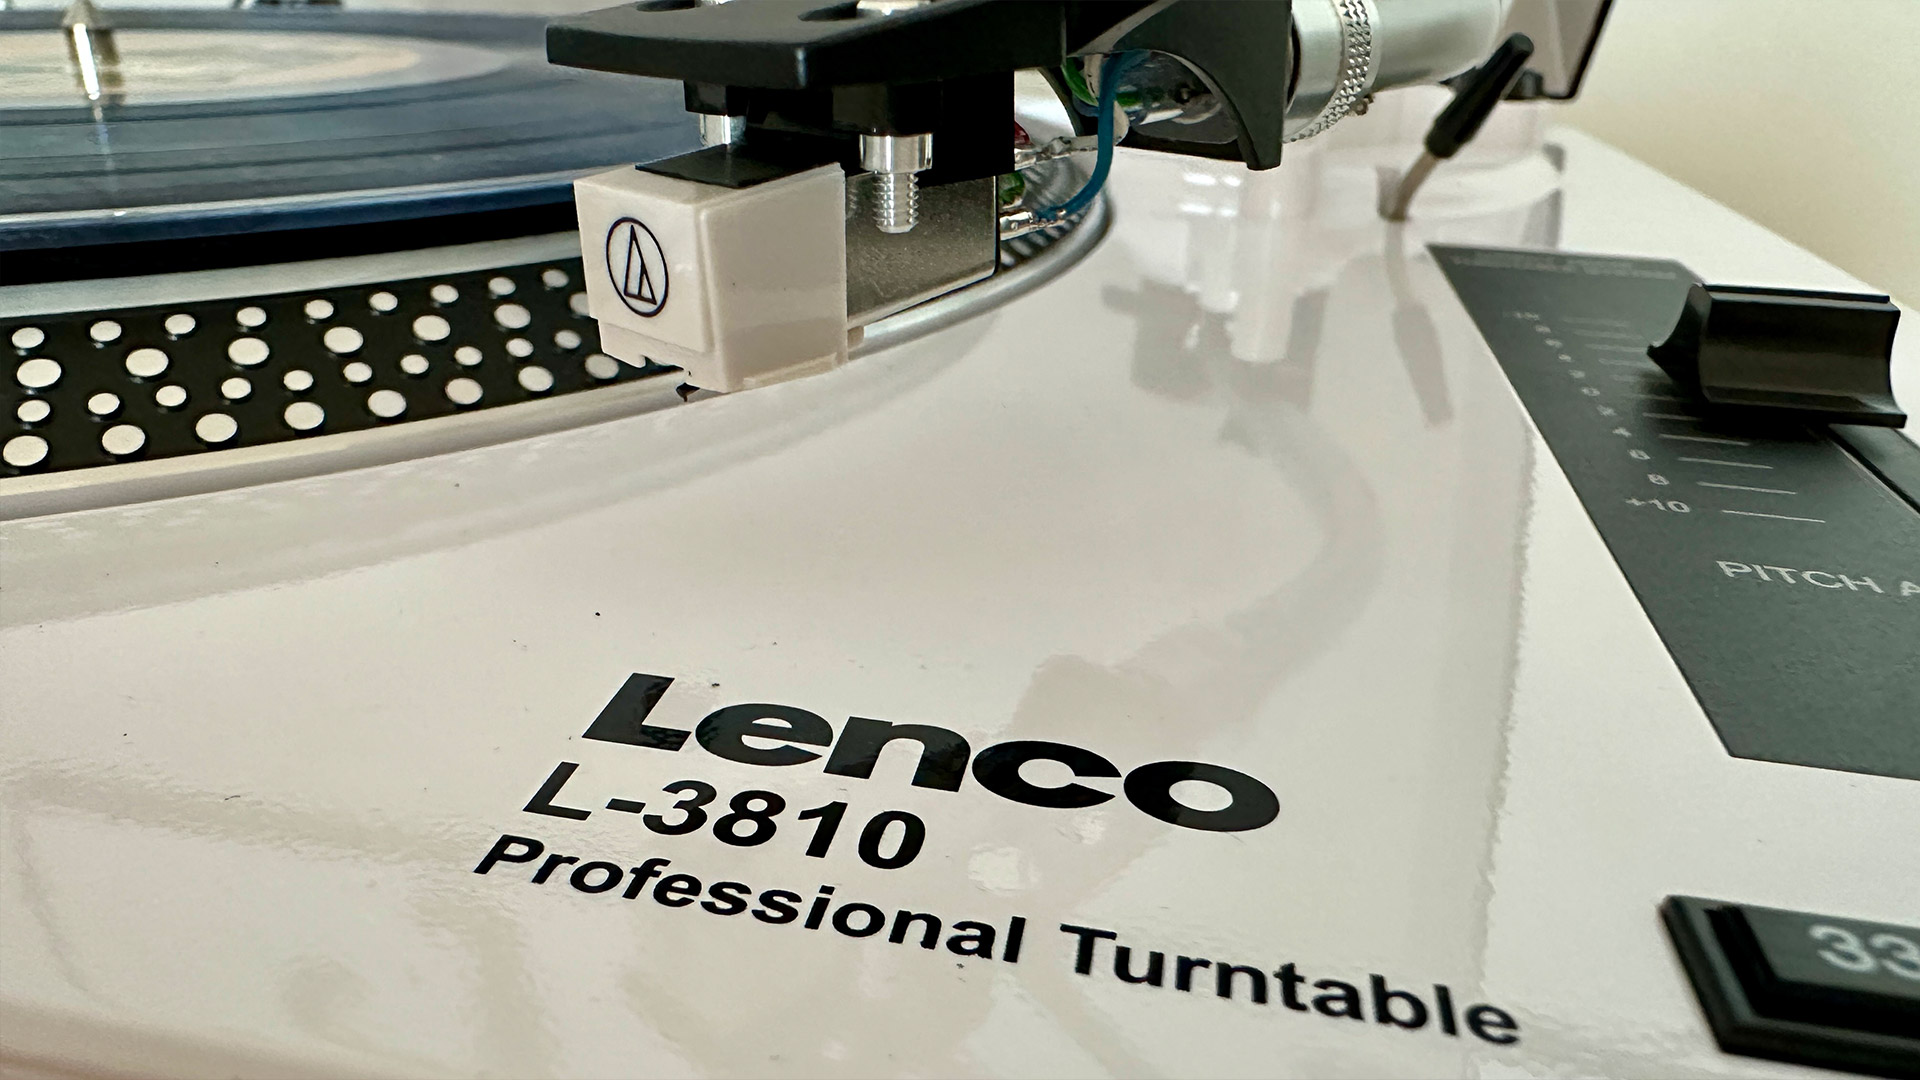 The Lenco L-3180 playing a record